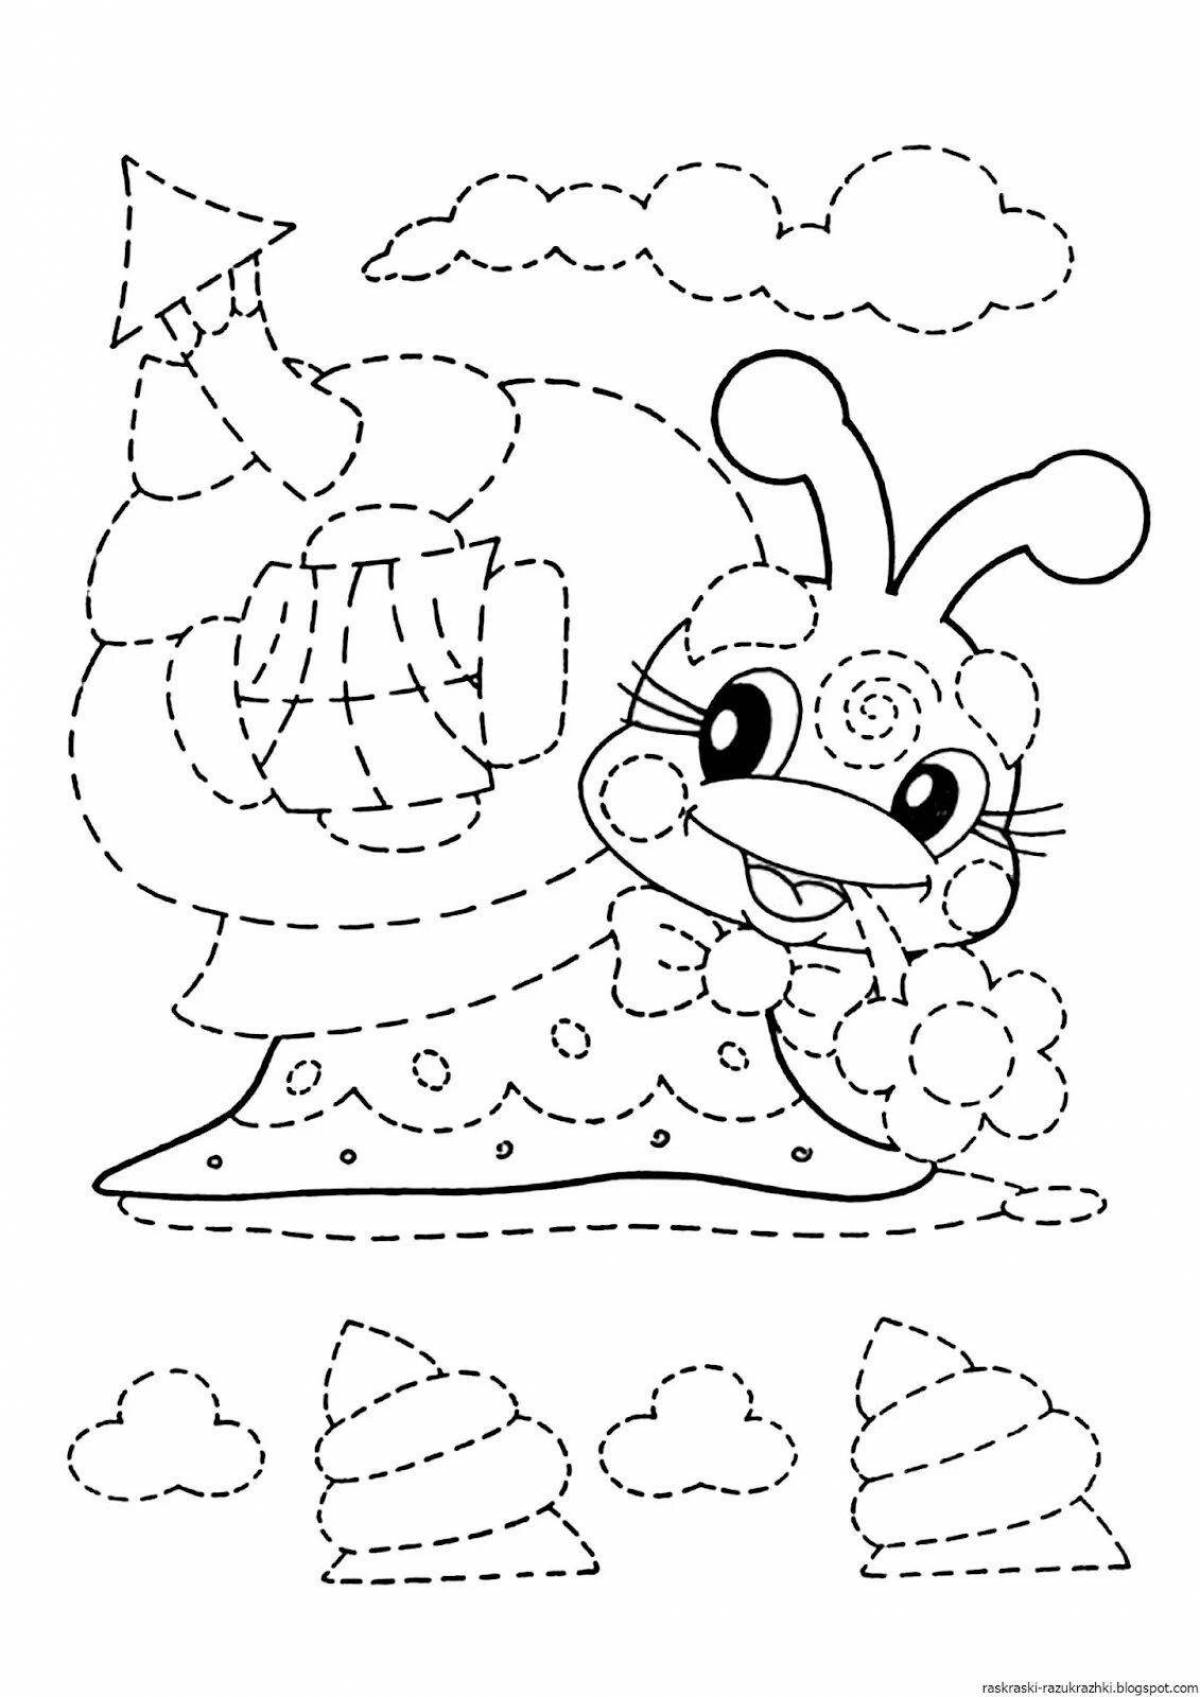 Stimulating dotted coloring pages for kids